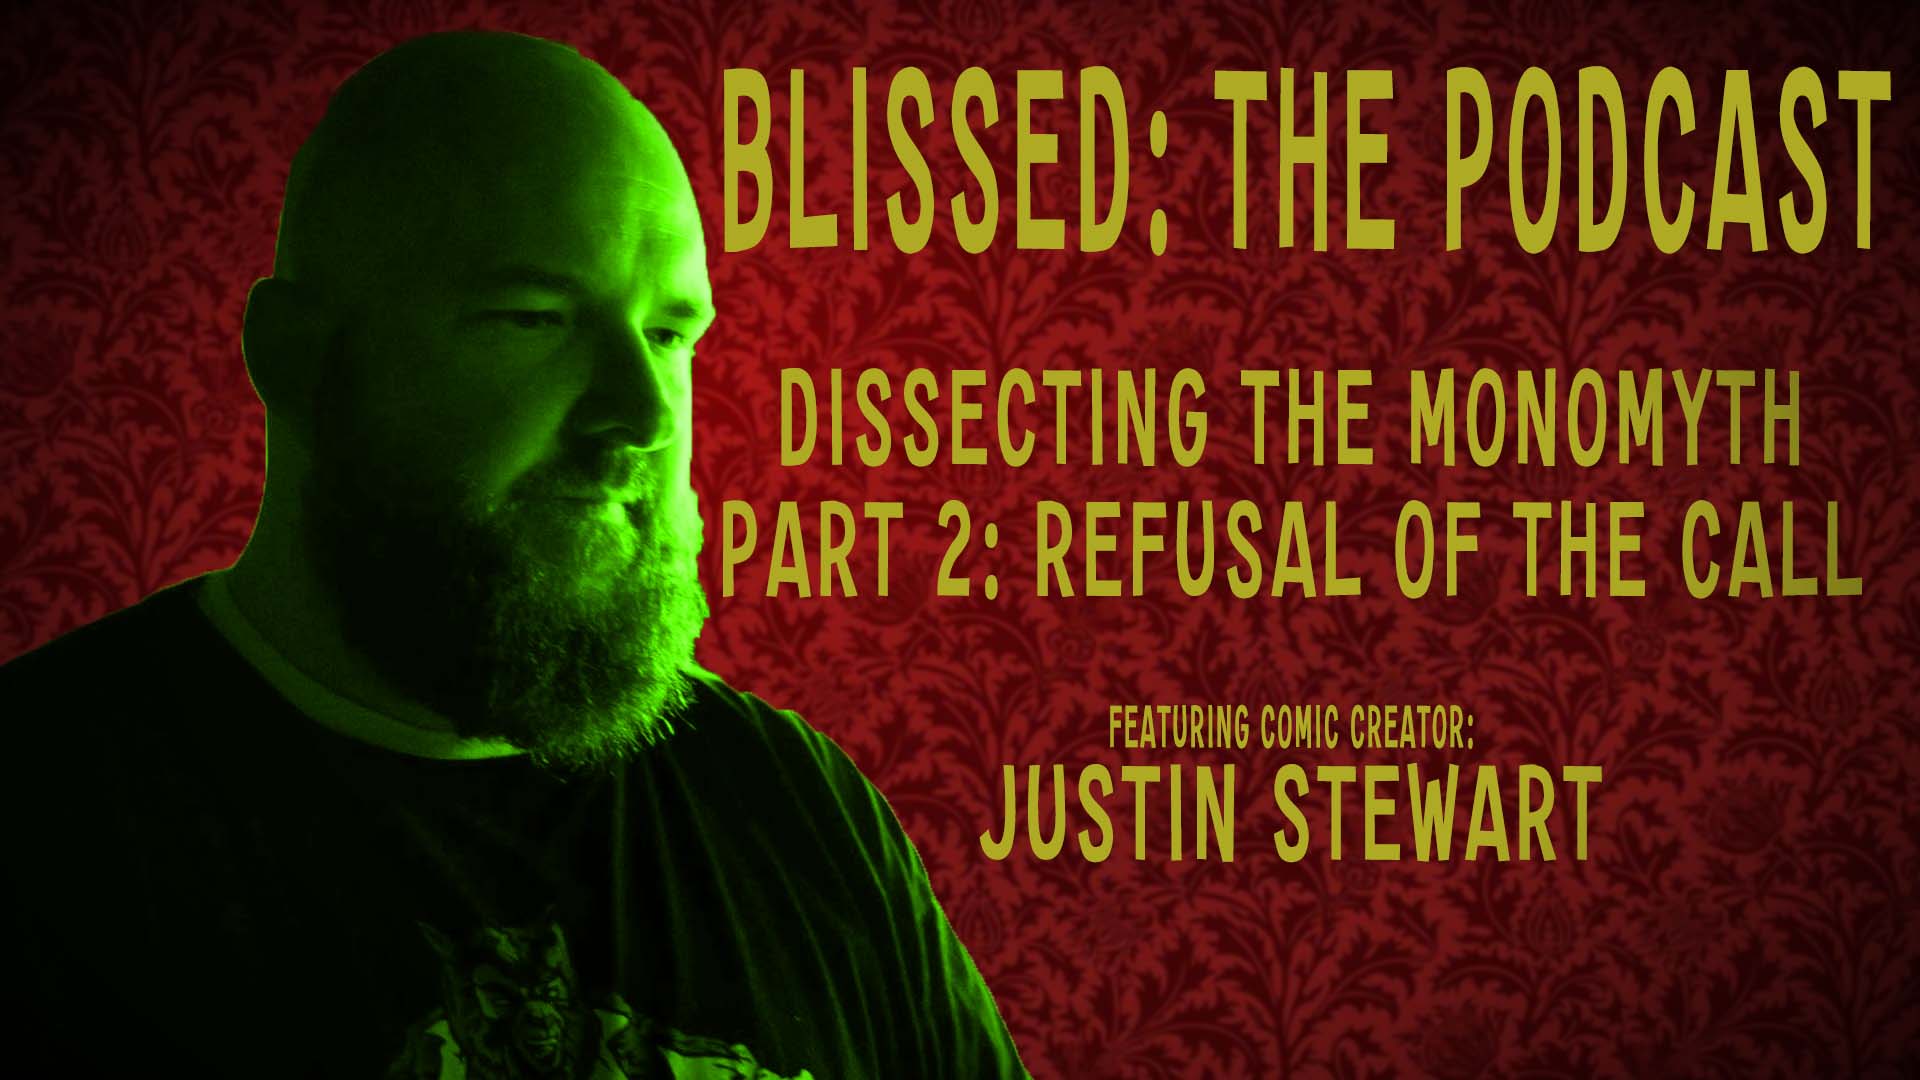 Blissed: The Podcast - Episode 5 - Dissecting the Monomyth Part 2: Refusal of the Call - How to Find Your Bliss